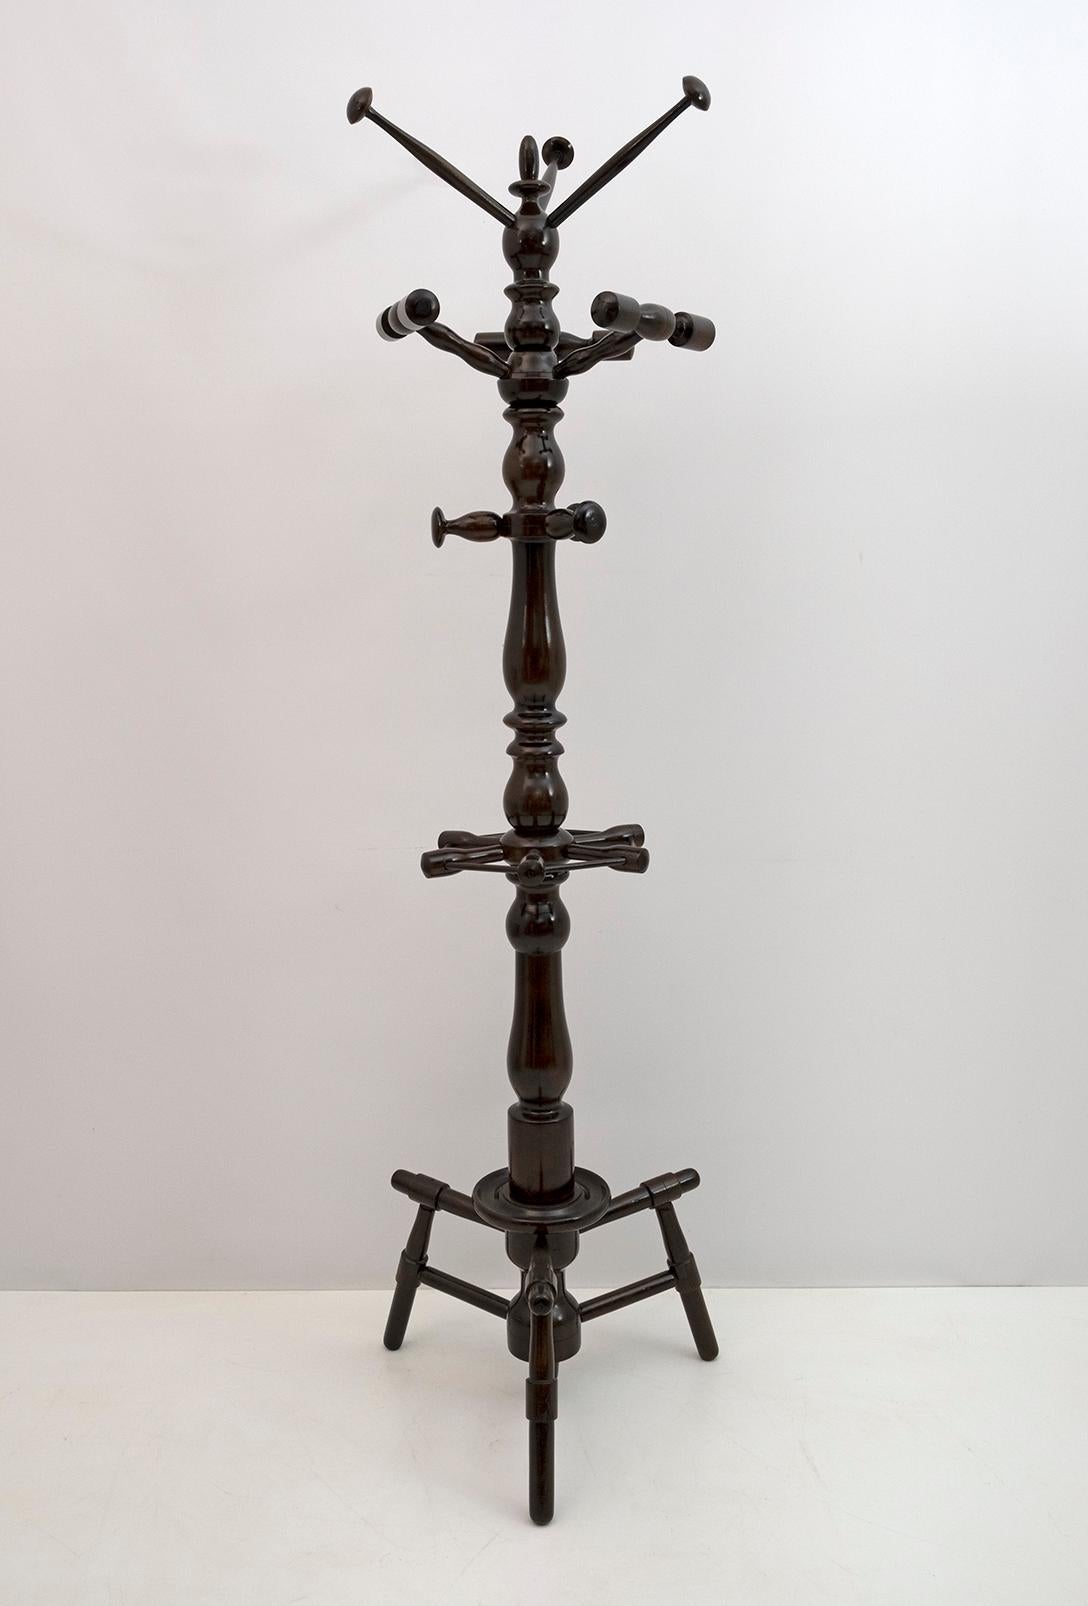 Particular and impressive coat stand with umbrella stand in turned walnut, produced in Italy in the 1950s. It has been restored and polished with shellac.
The coat hanger is made up of various hangers, the central part is designed to hang